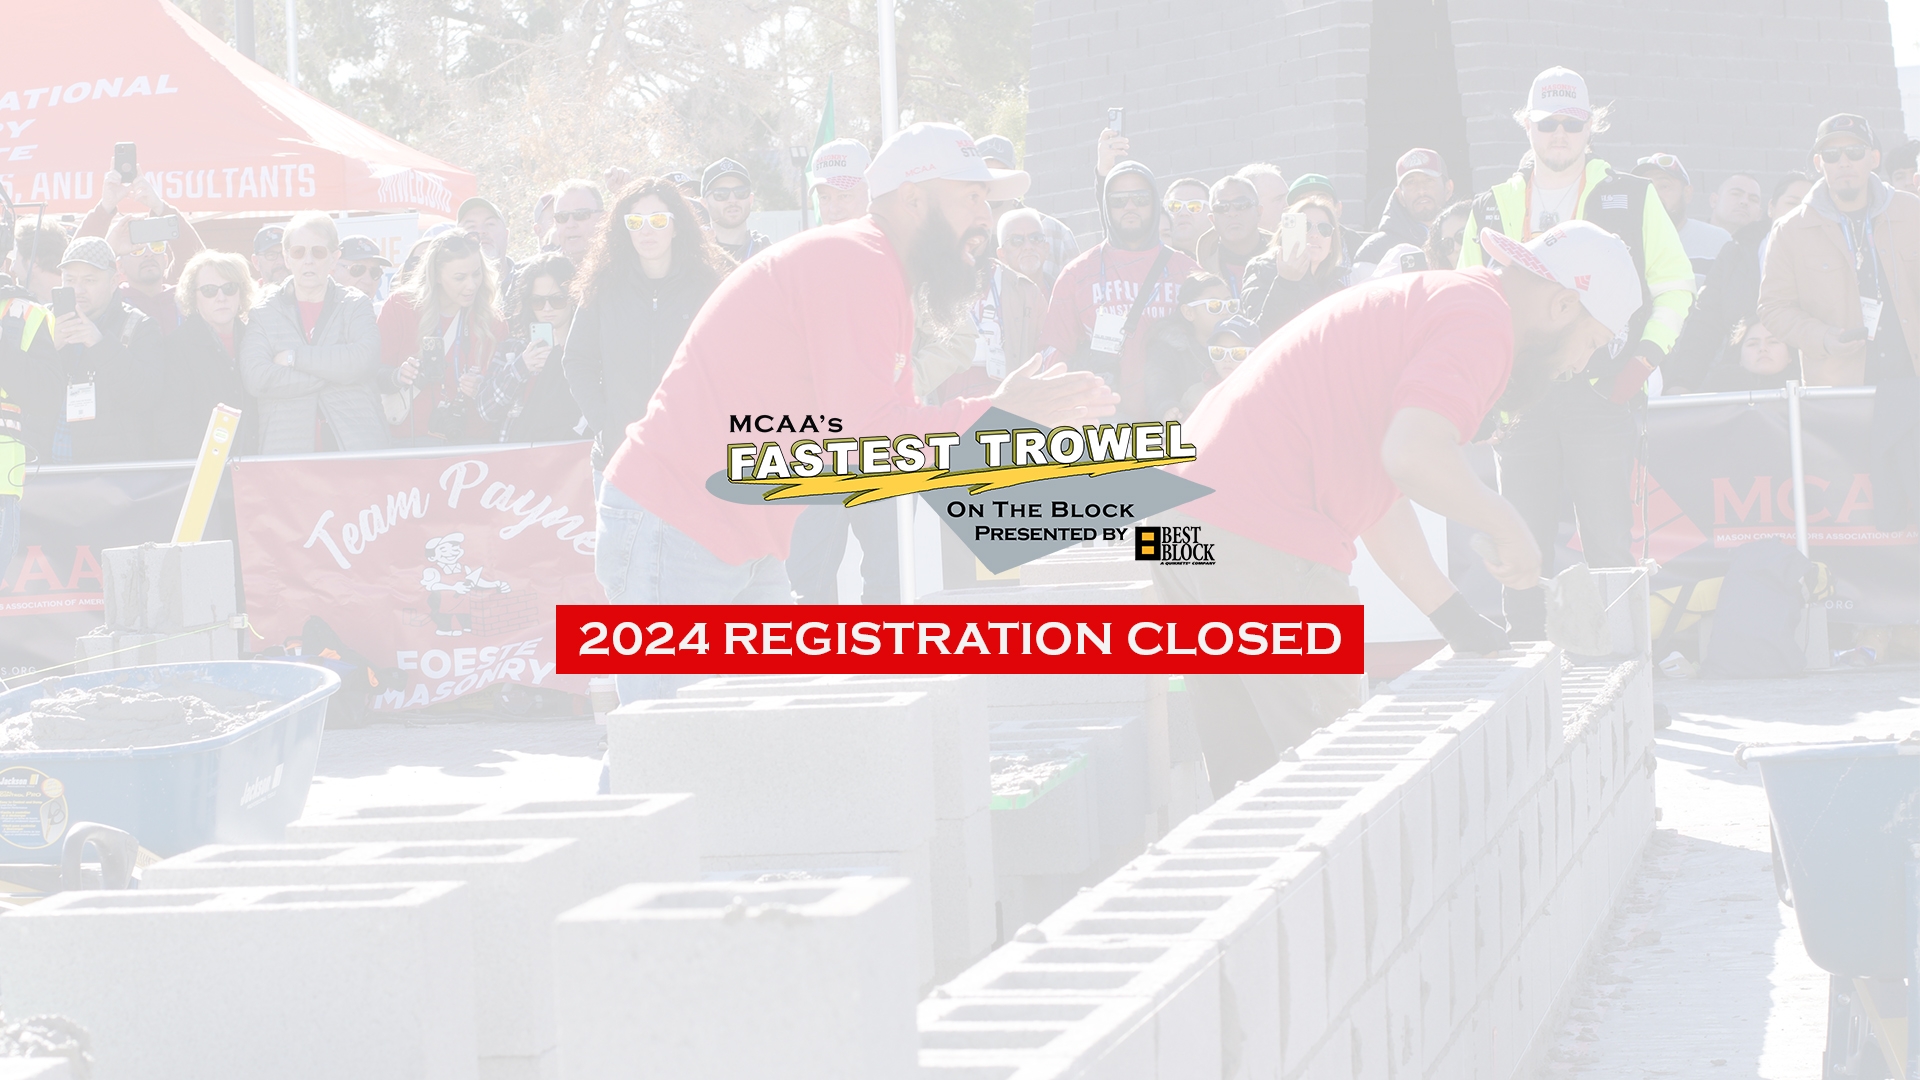 REGISTRATION CLOSED 2024 Fastest Trowel On The Block Presented By Best